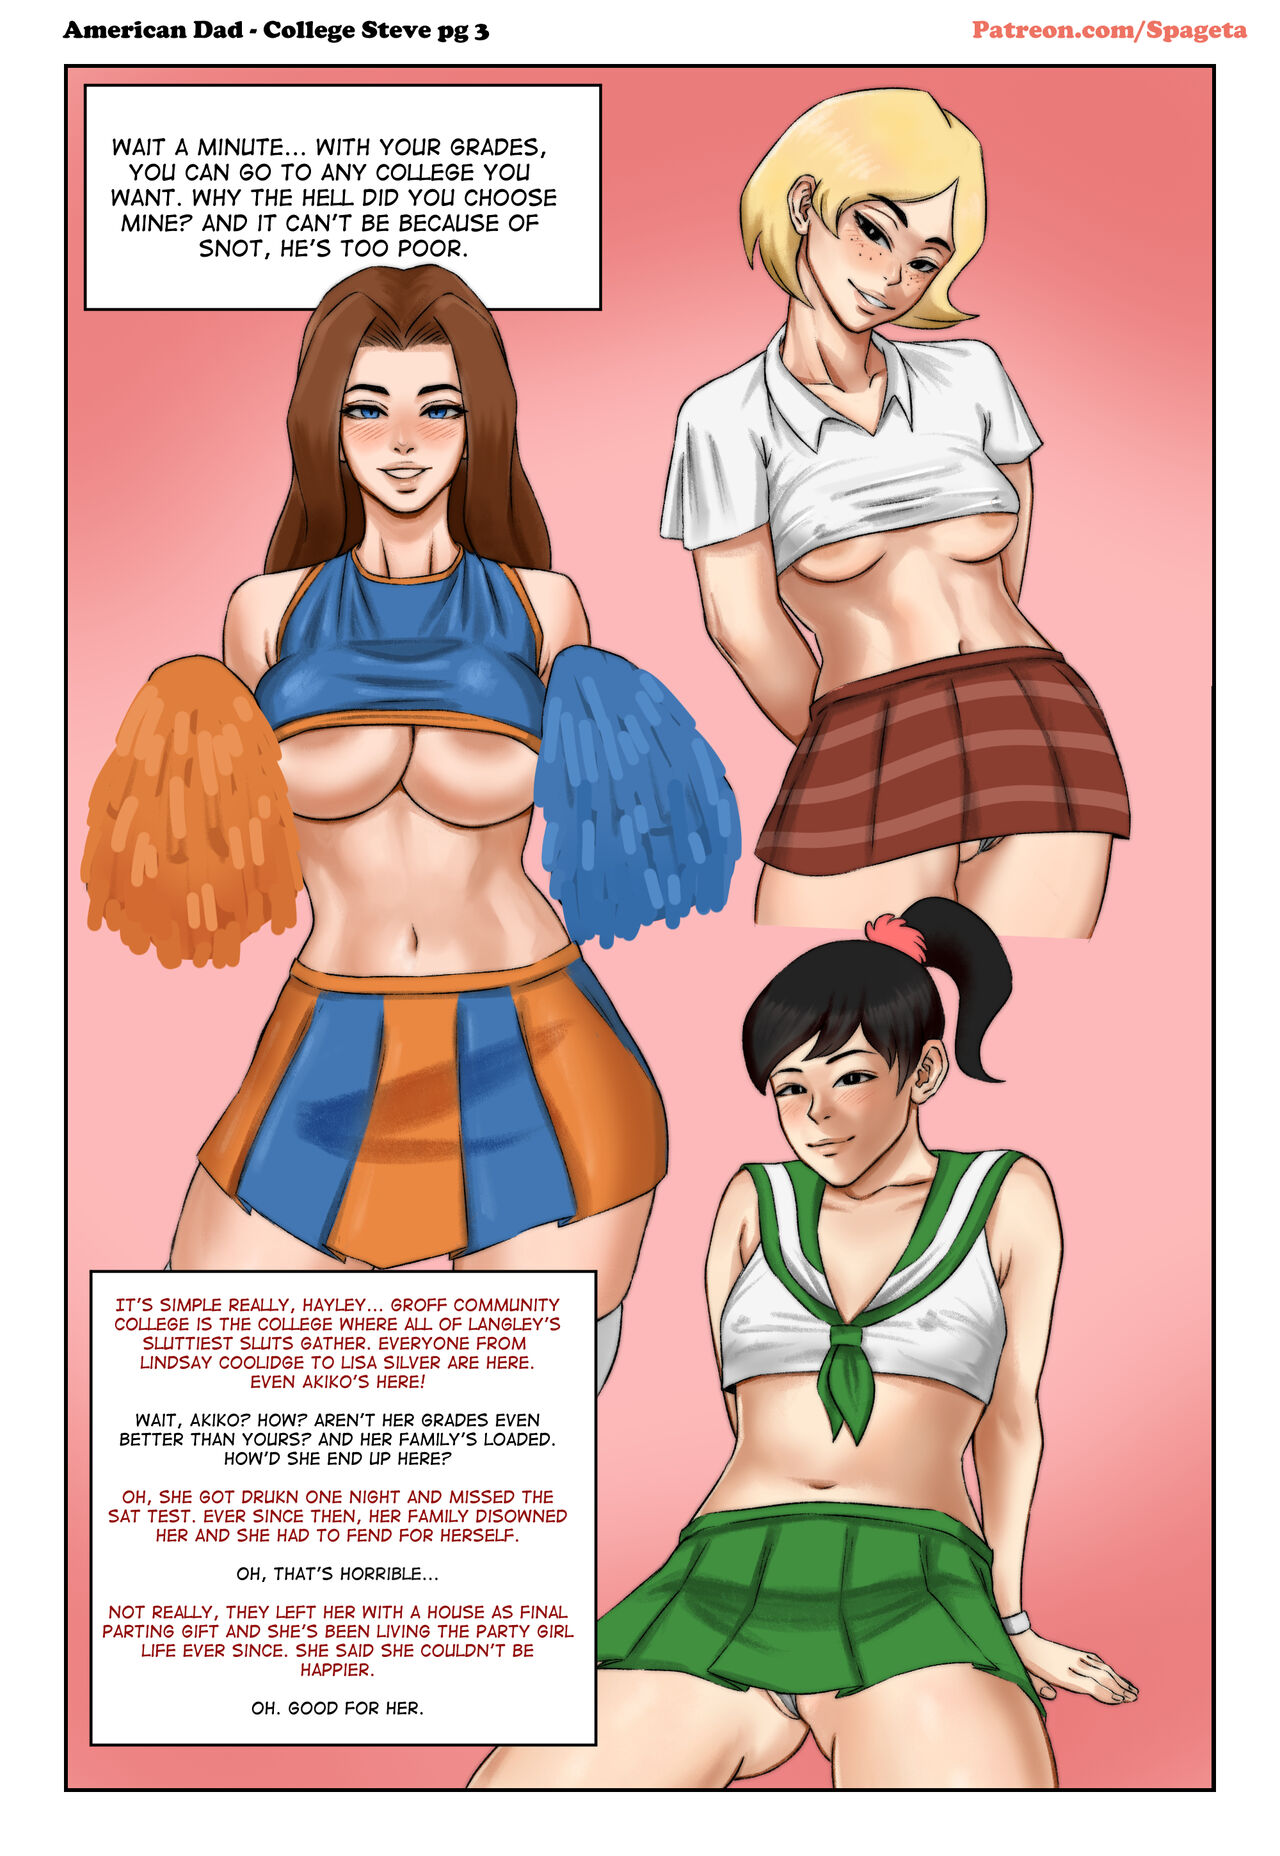 1280px x 1856px - College Steve - American Dad by Spageta - FreeAdultComix